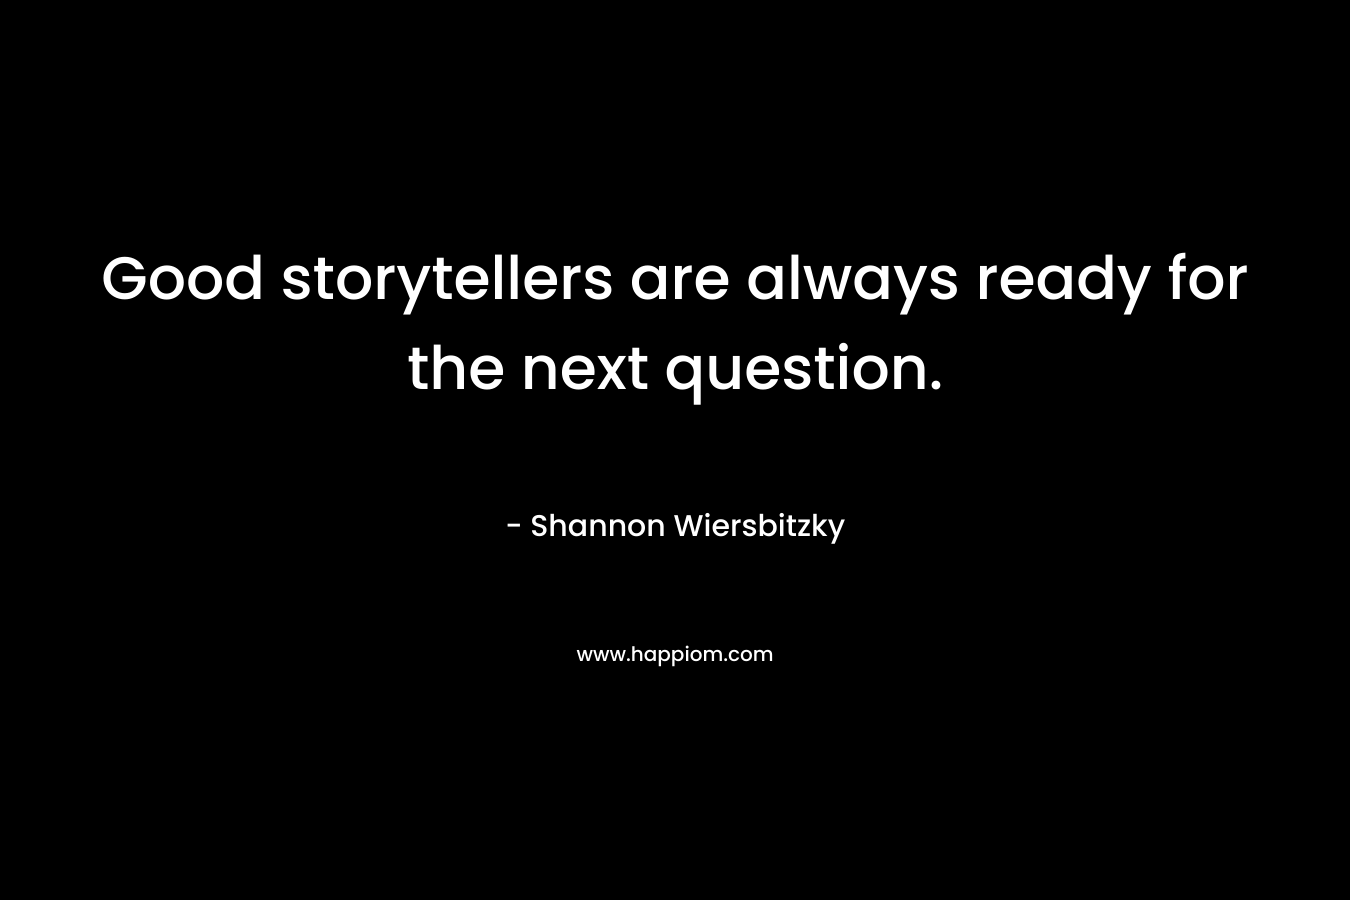 Good storytellers are always ready for the next question. – Shannon Wiersbitzky